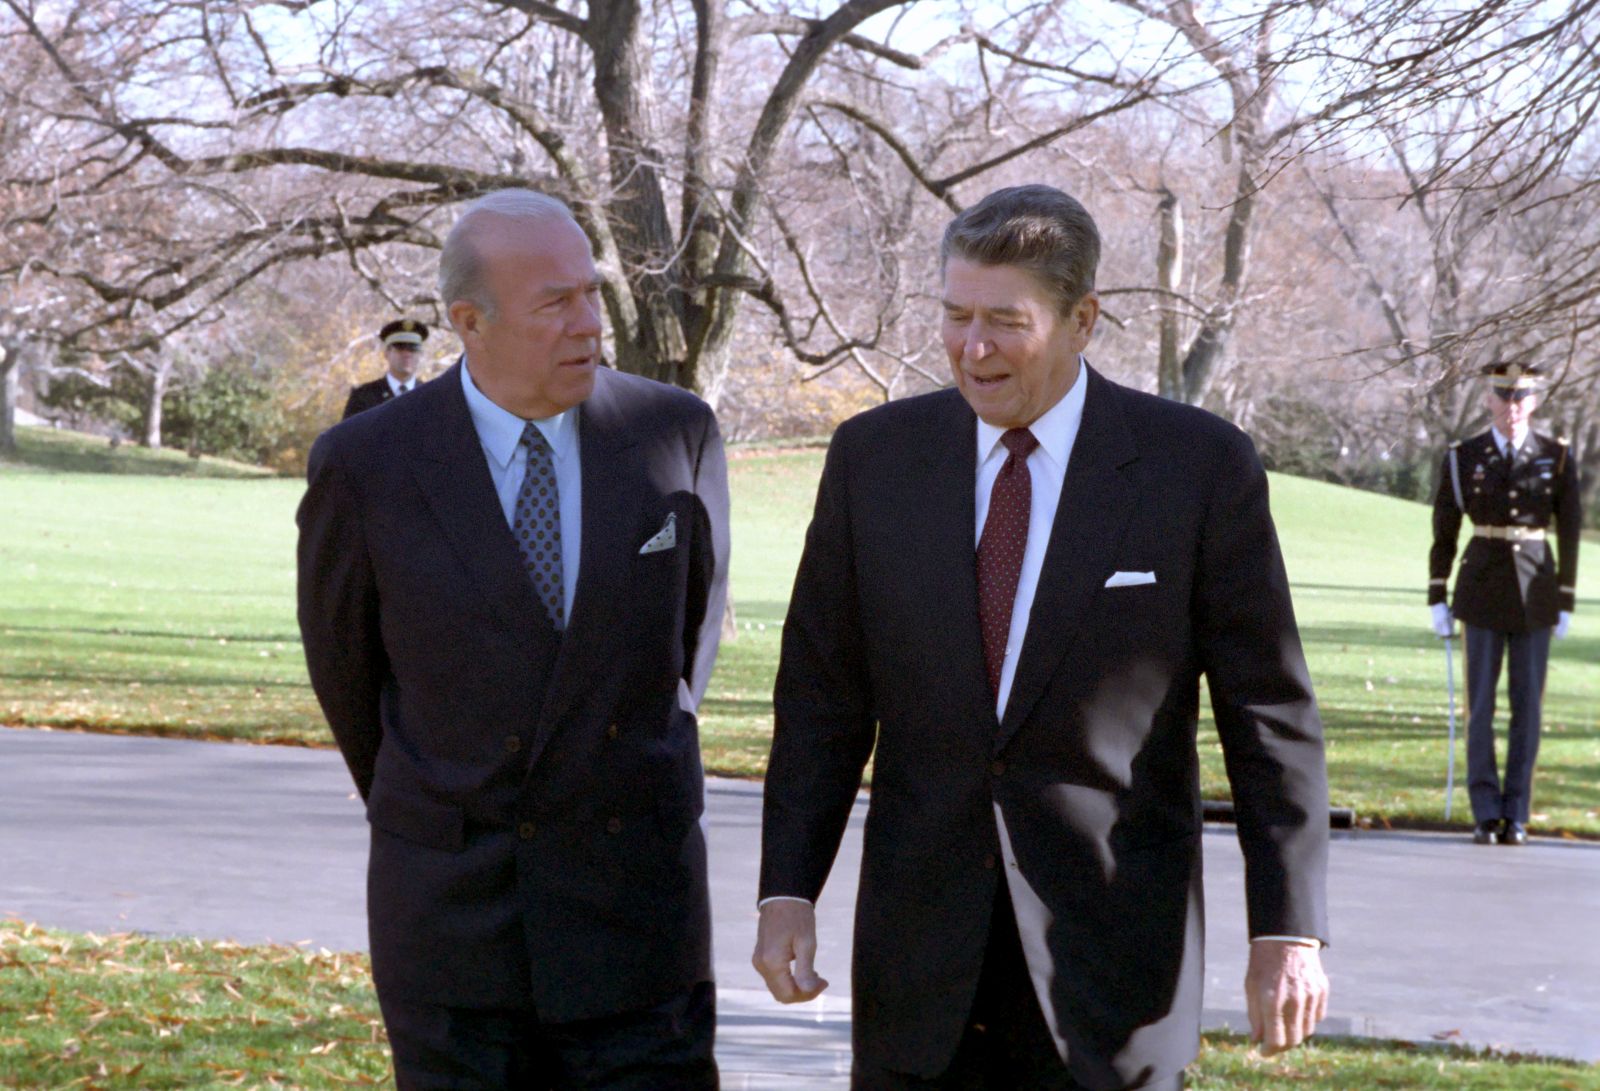 12/4/1986 President Reagan walking with George Shultz outside the Oval Office